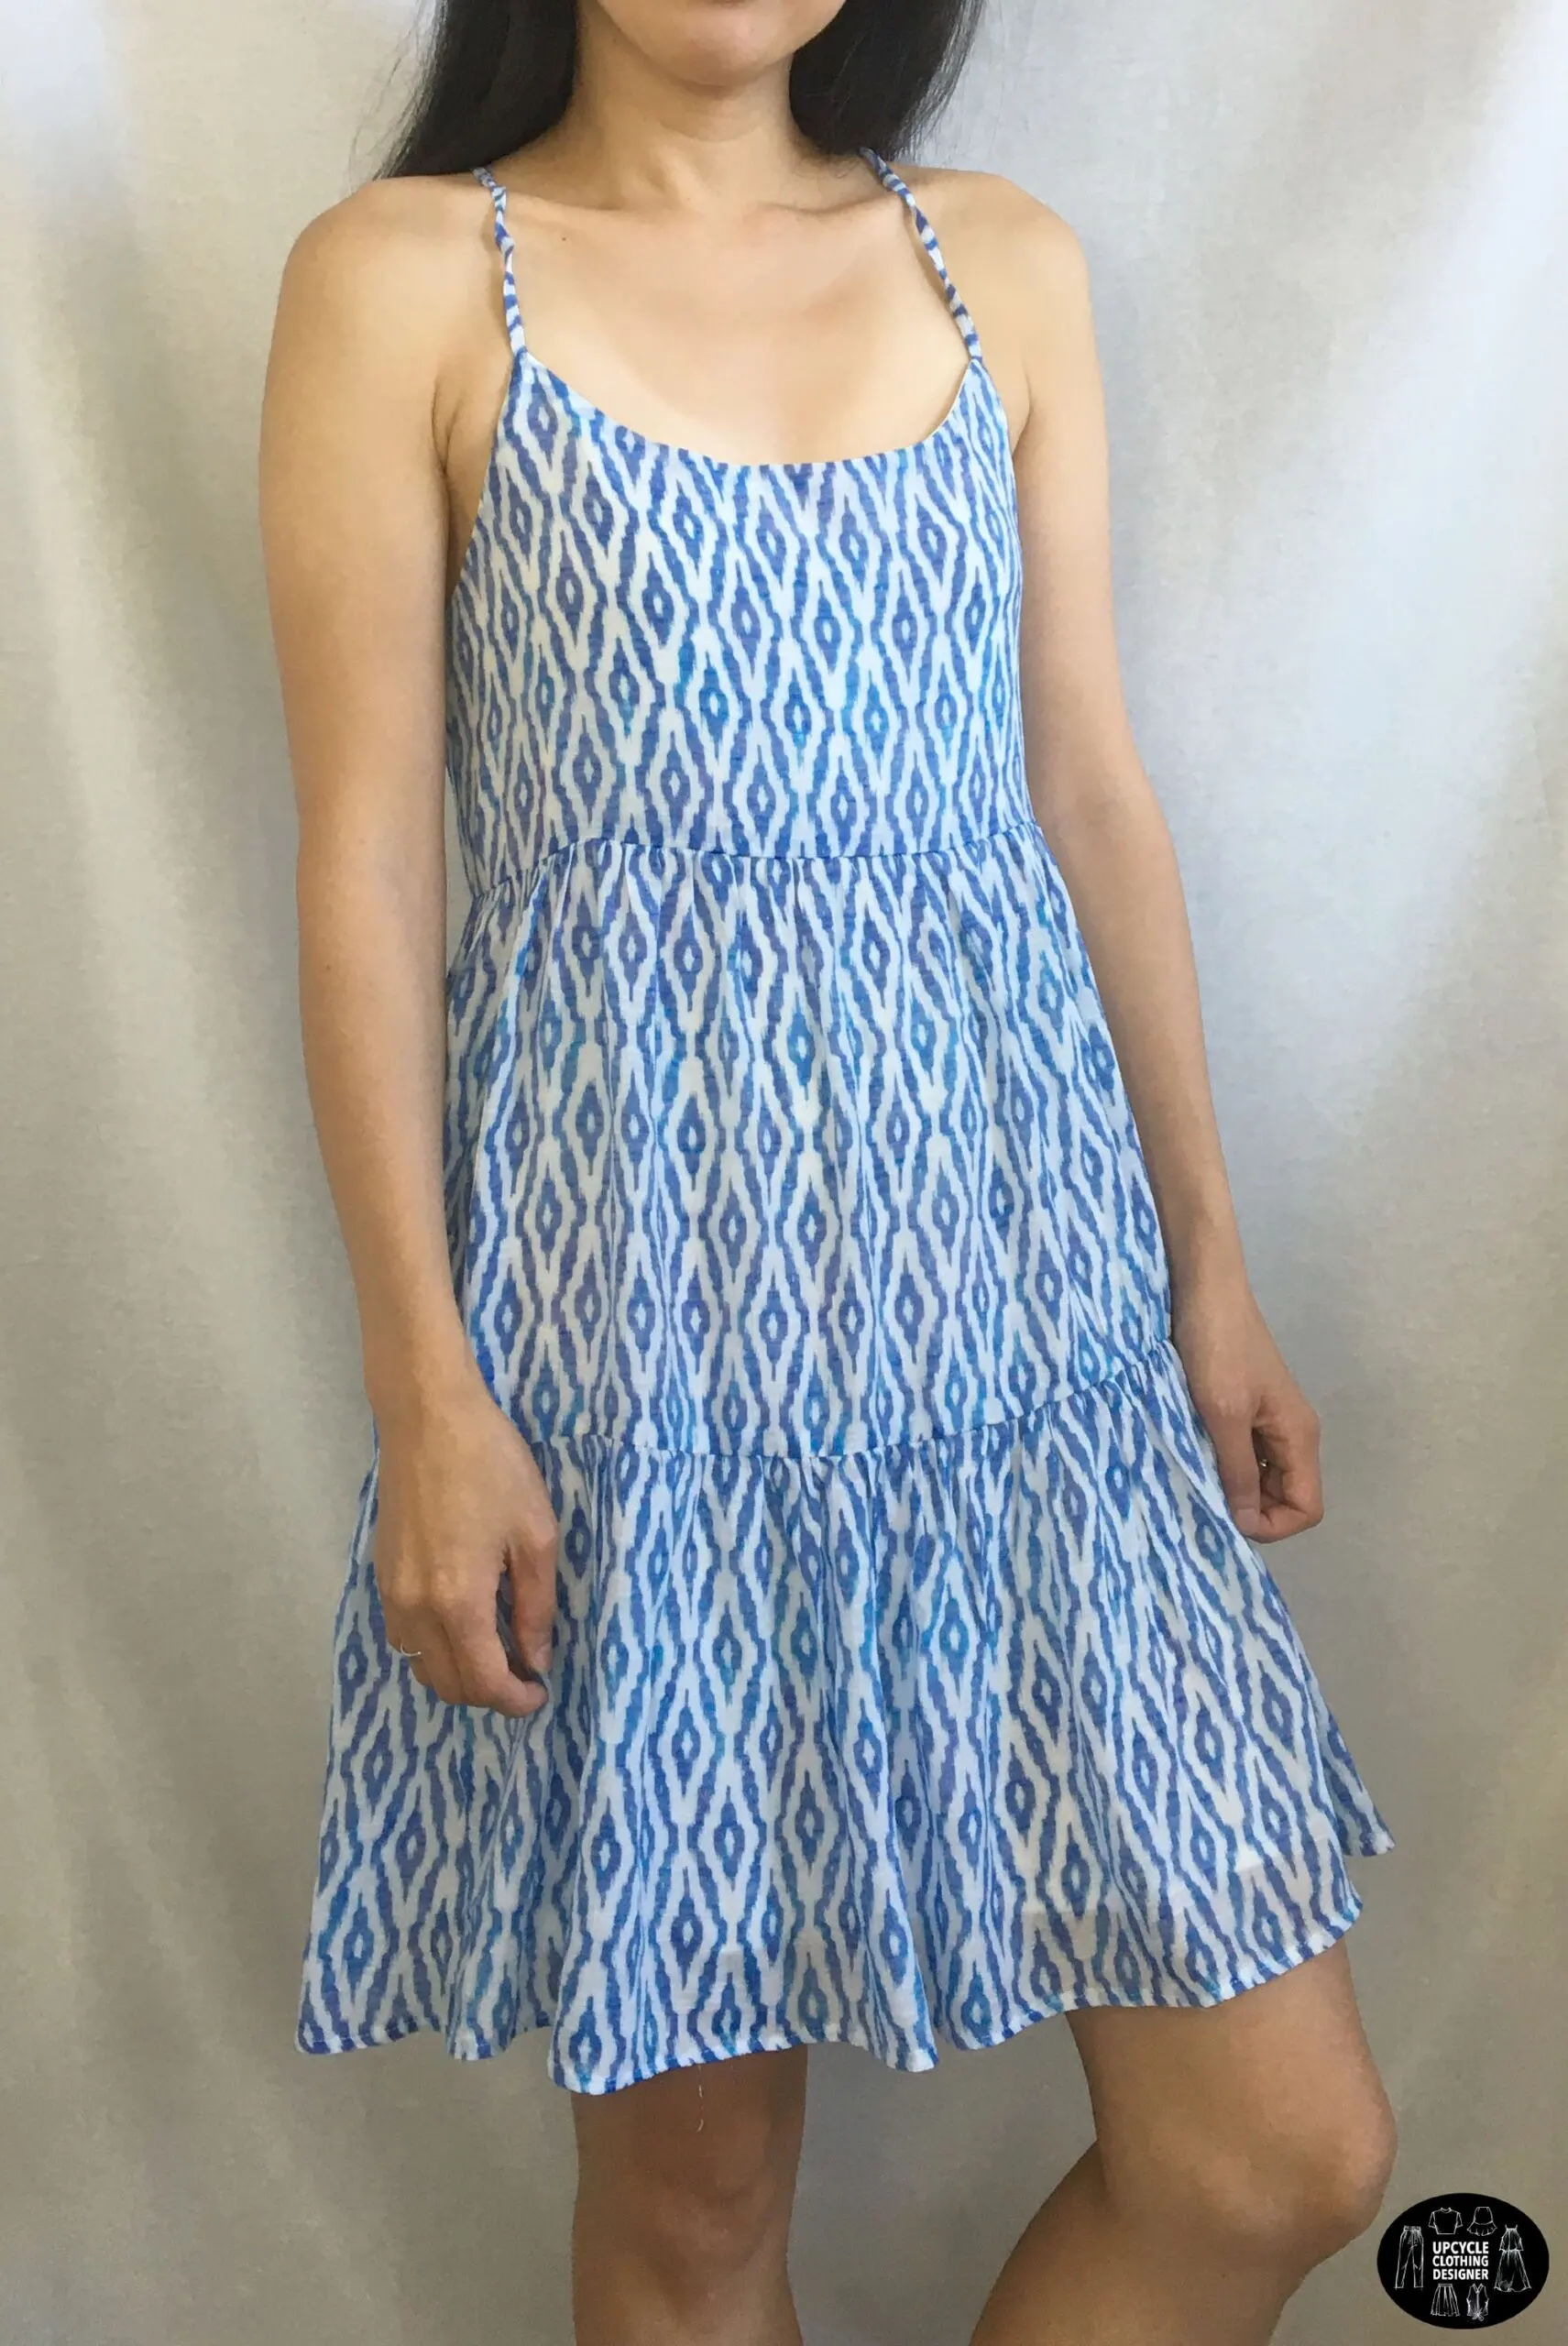 Sideview of the DIY tiered lace-up babydoll dress